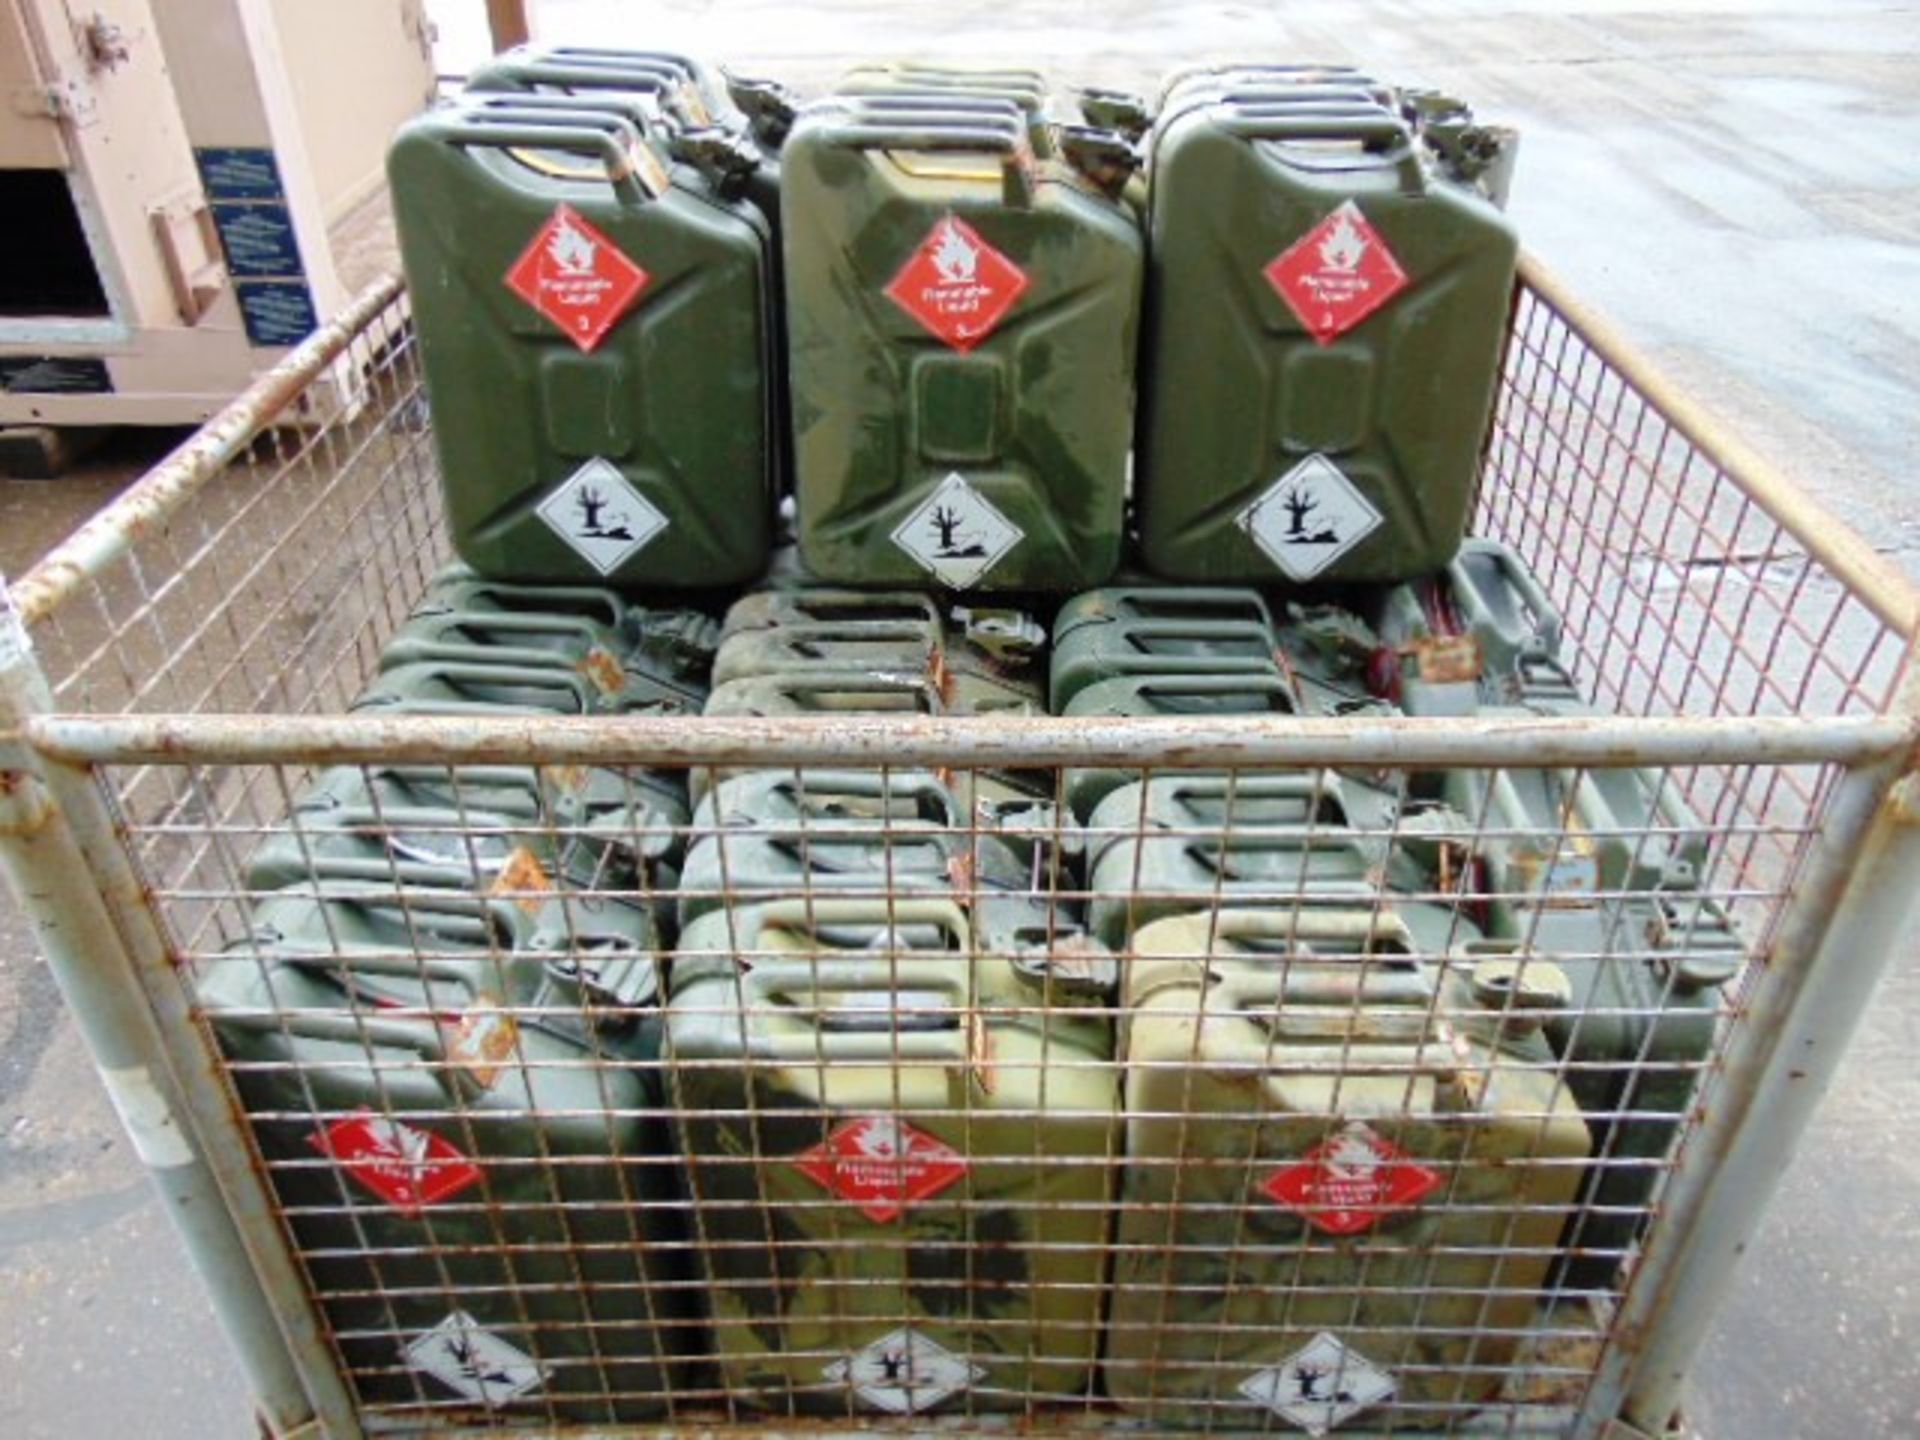 26 x 20L Jerry Cans